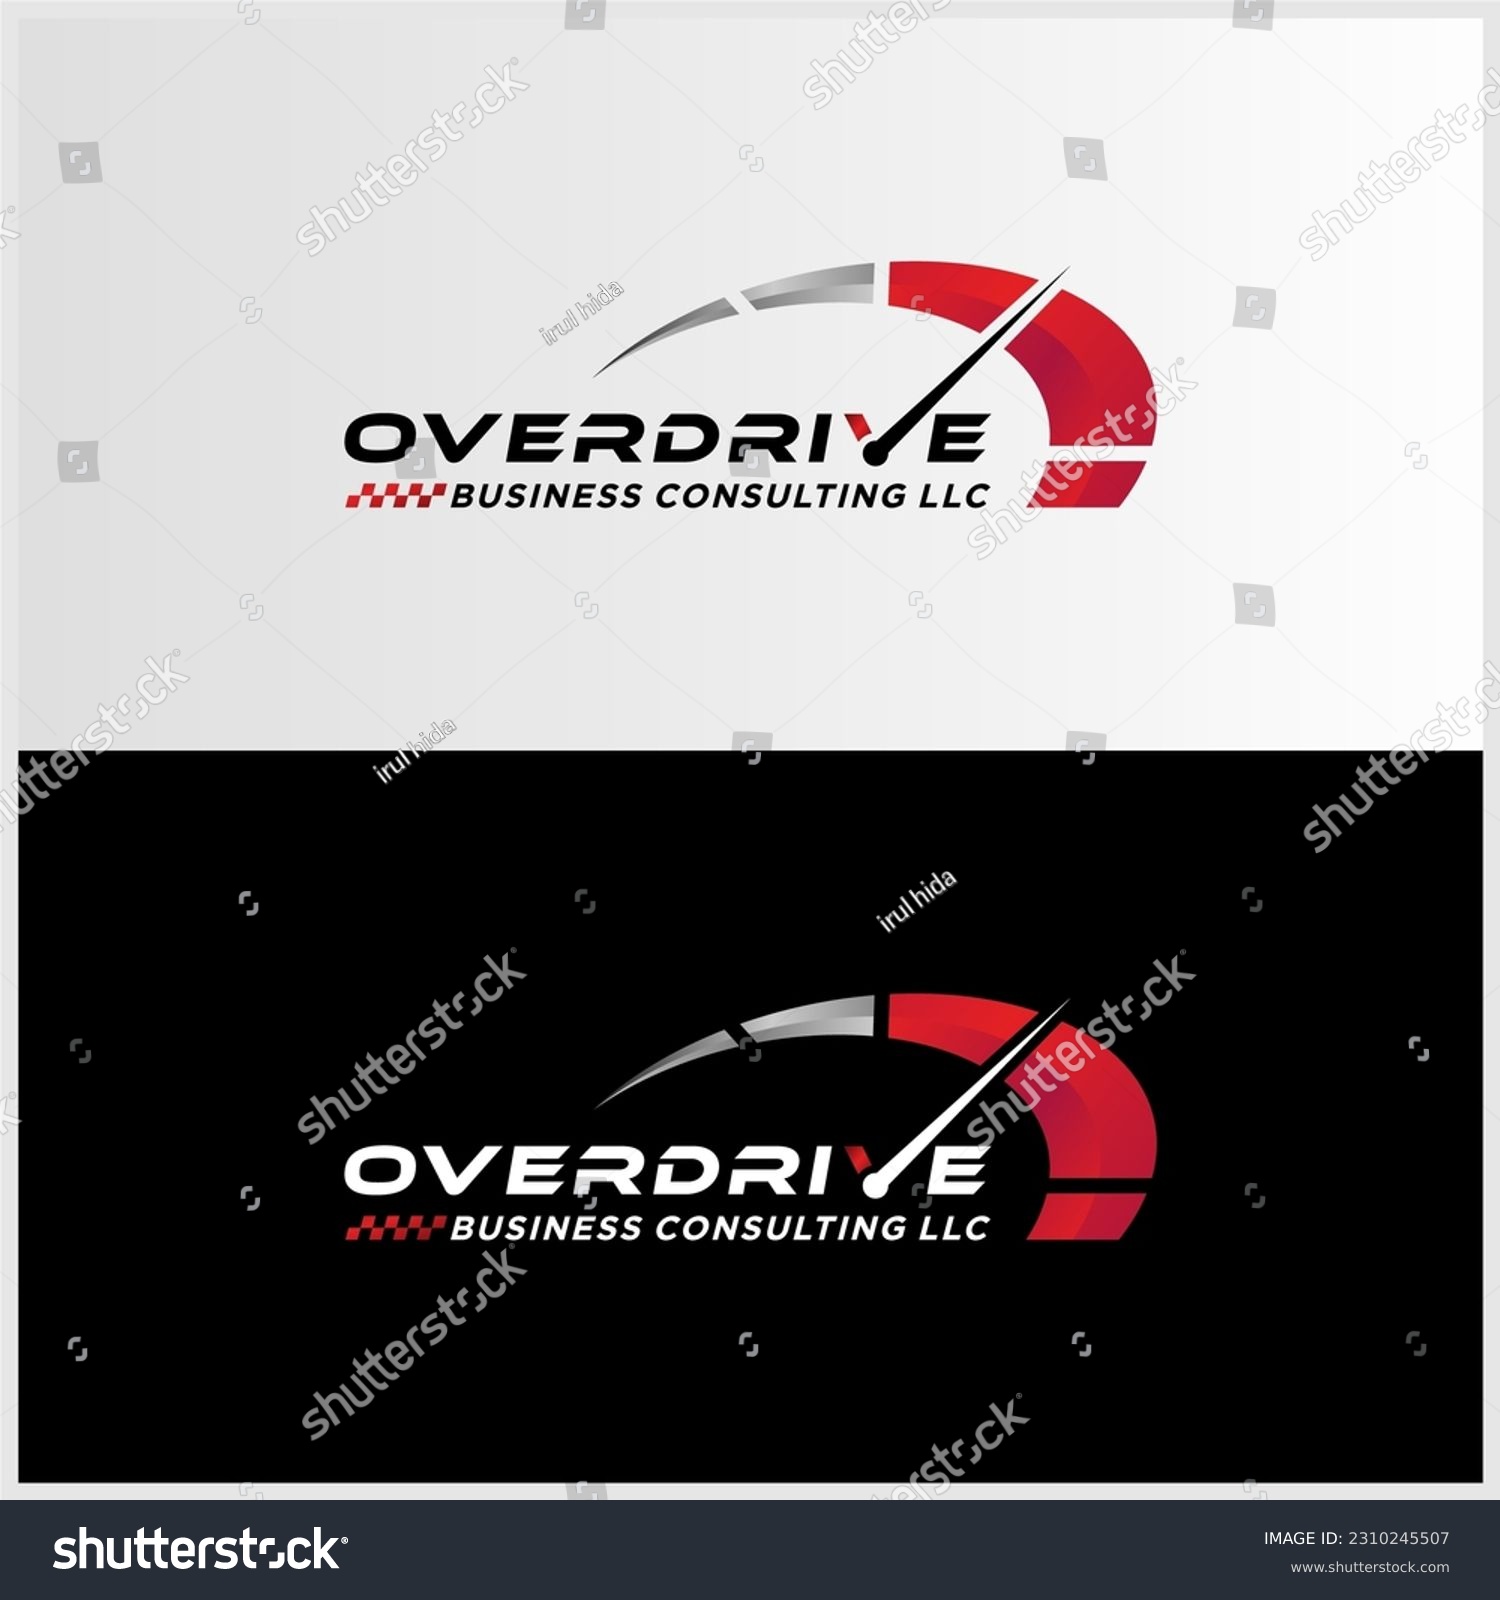 SVG of Simple letter or word speedometer needle image graphic icon logo design abstract concept vector stock. Can be used as symbol related to sportcar or workshop svg